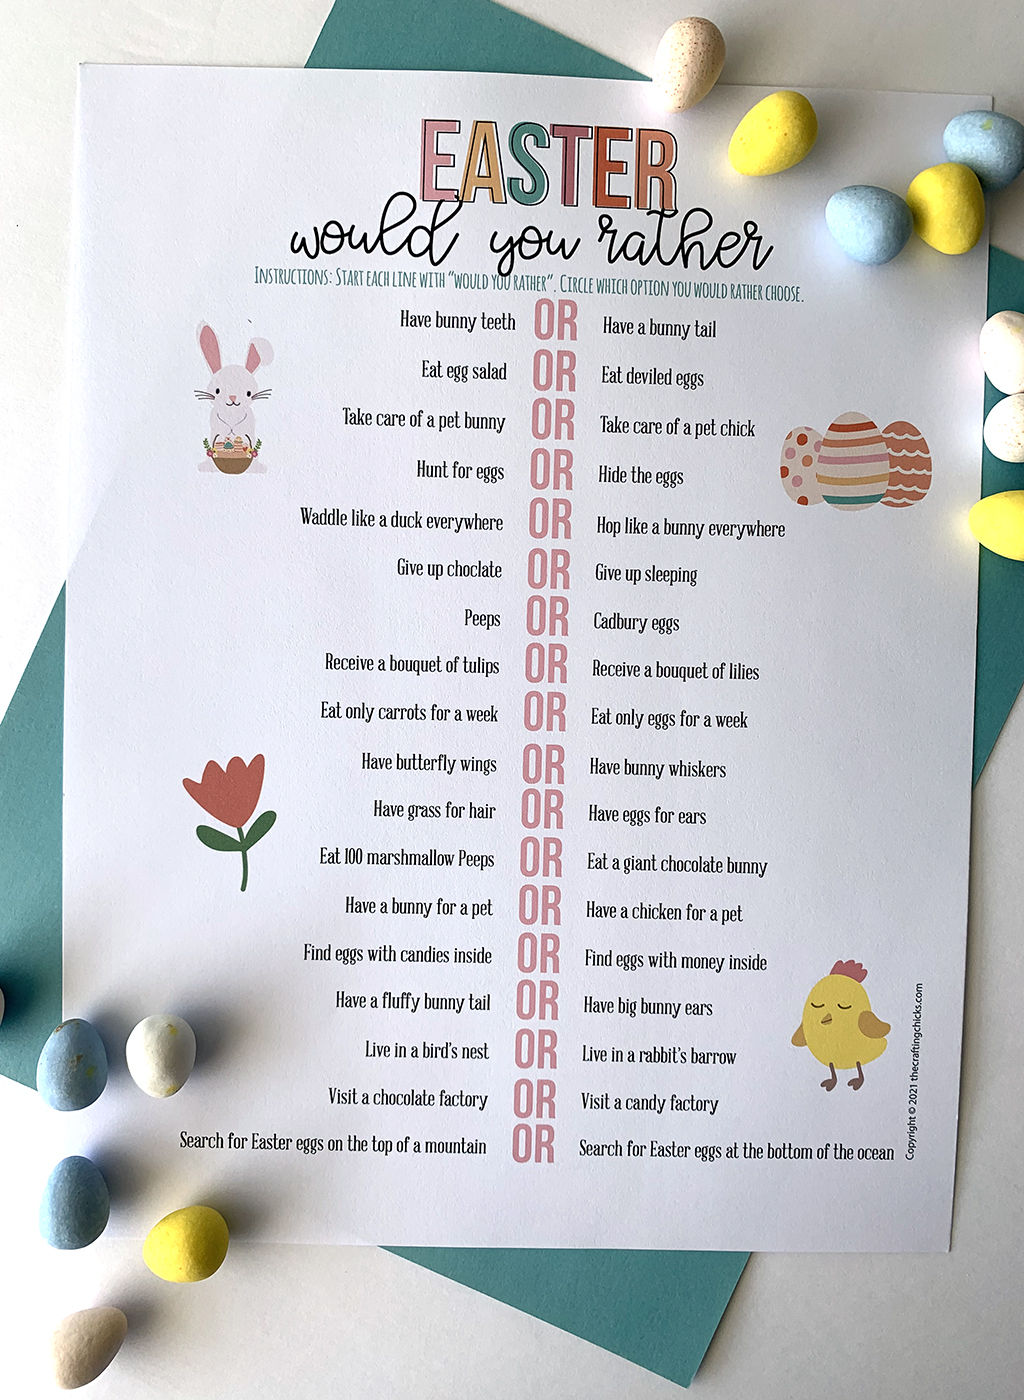 Funny Easter Would You Rather Questions for Kids